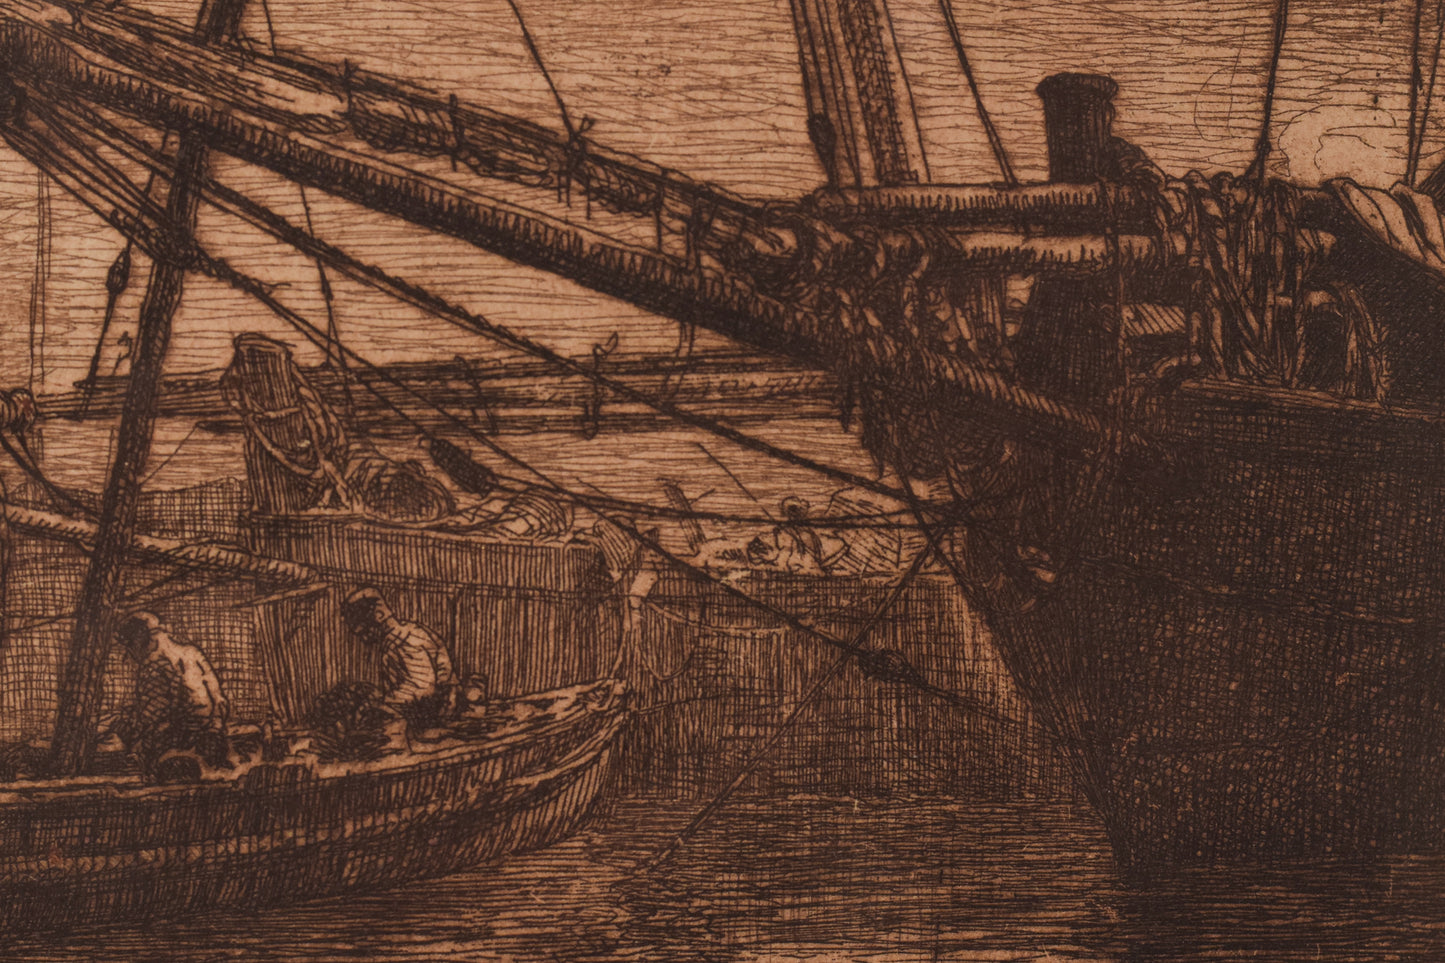 Etching of Boats